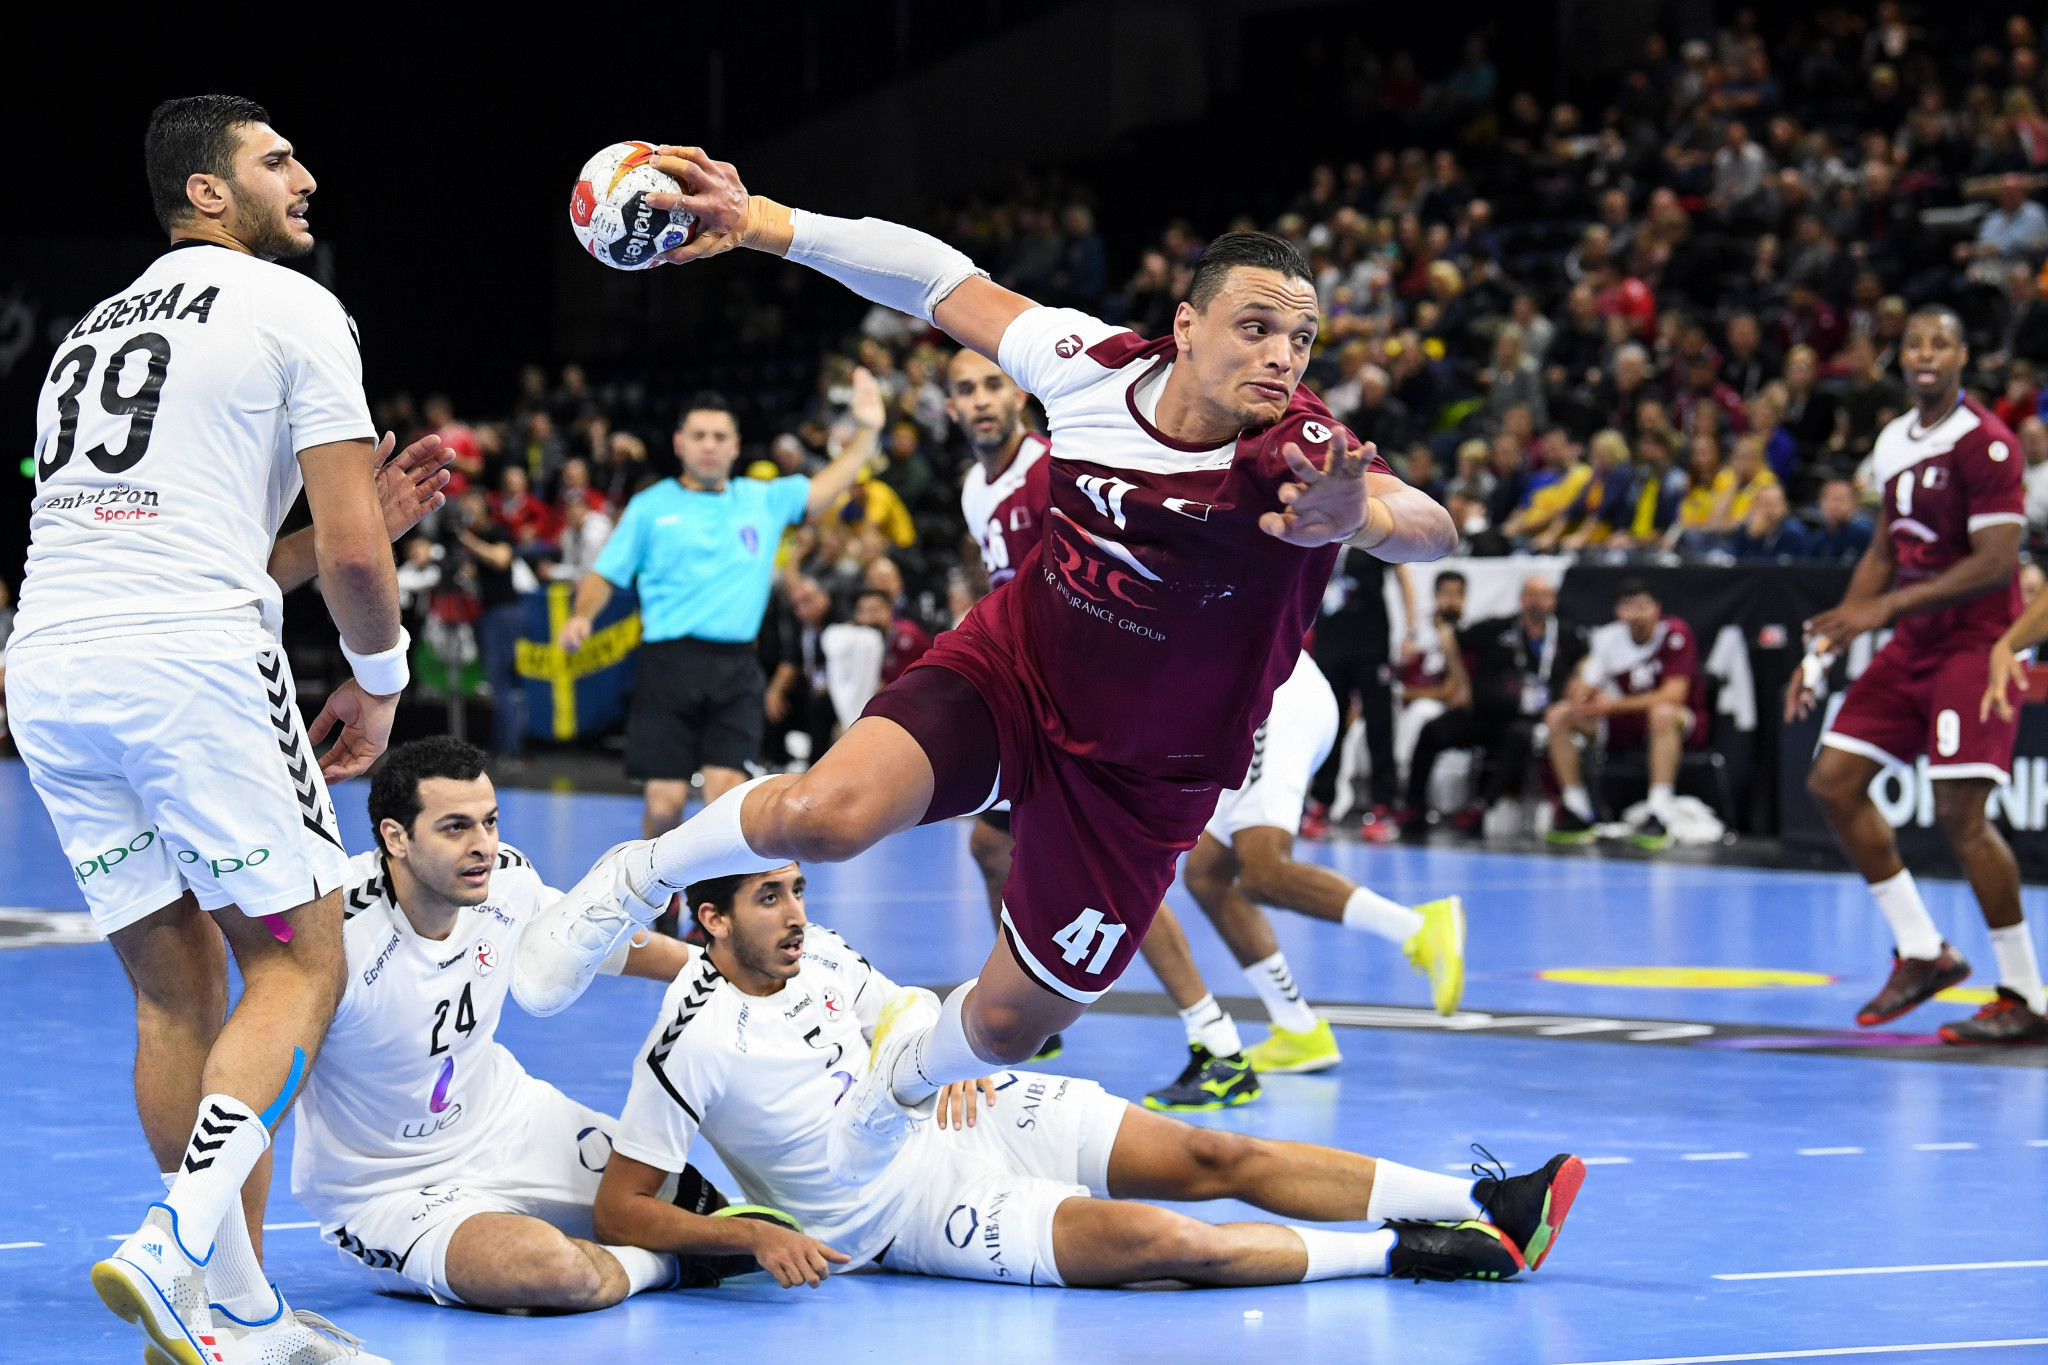 Qatar will start as firm favourites at the 2022 Asian Men's Handball Championship ©Getty Images